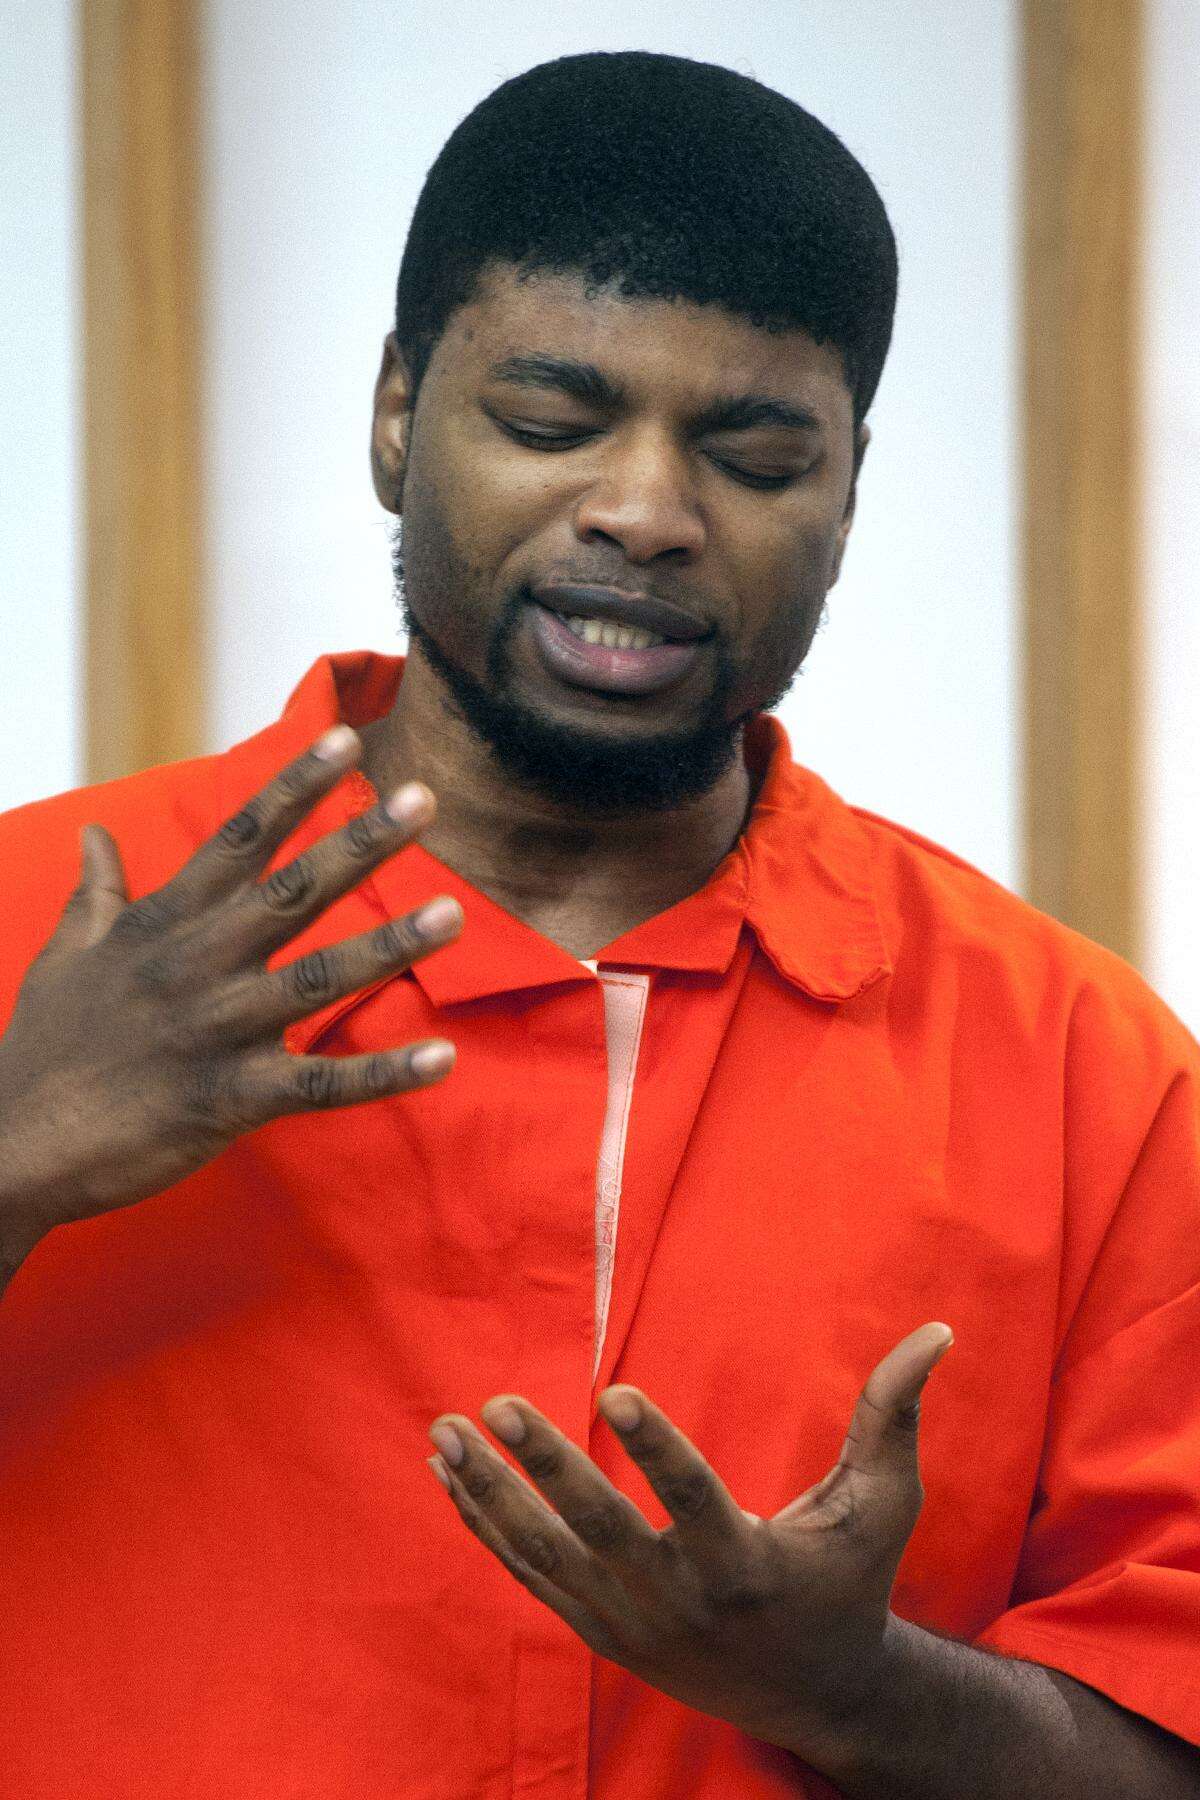 Jermaine Richards speaks during his sentencing in Bridgeport Superior Court, in Bridgeport, Conn. March 2, 2018. Richards was sentenced to 60-years for the 2013 murder of Alyssiah Marie Wiley.